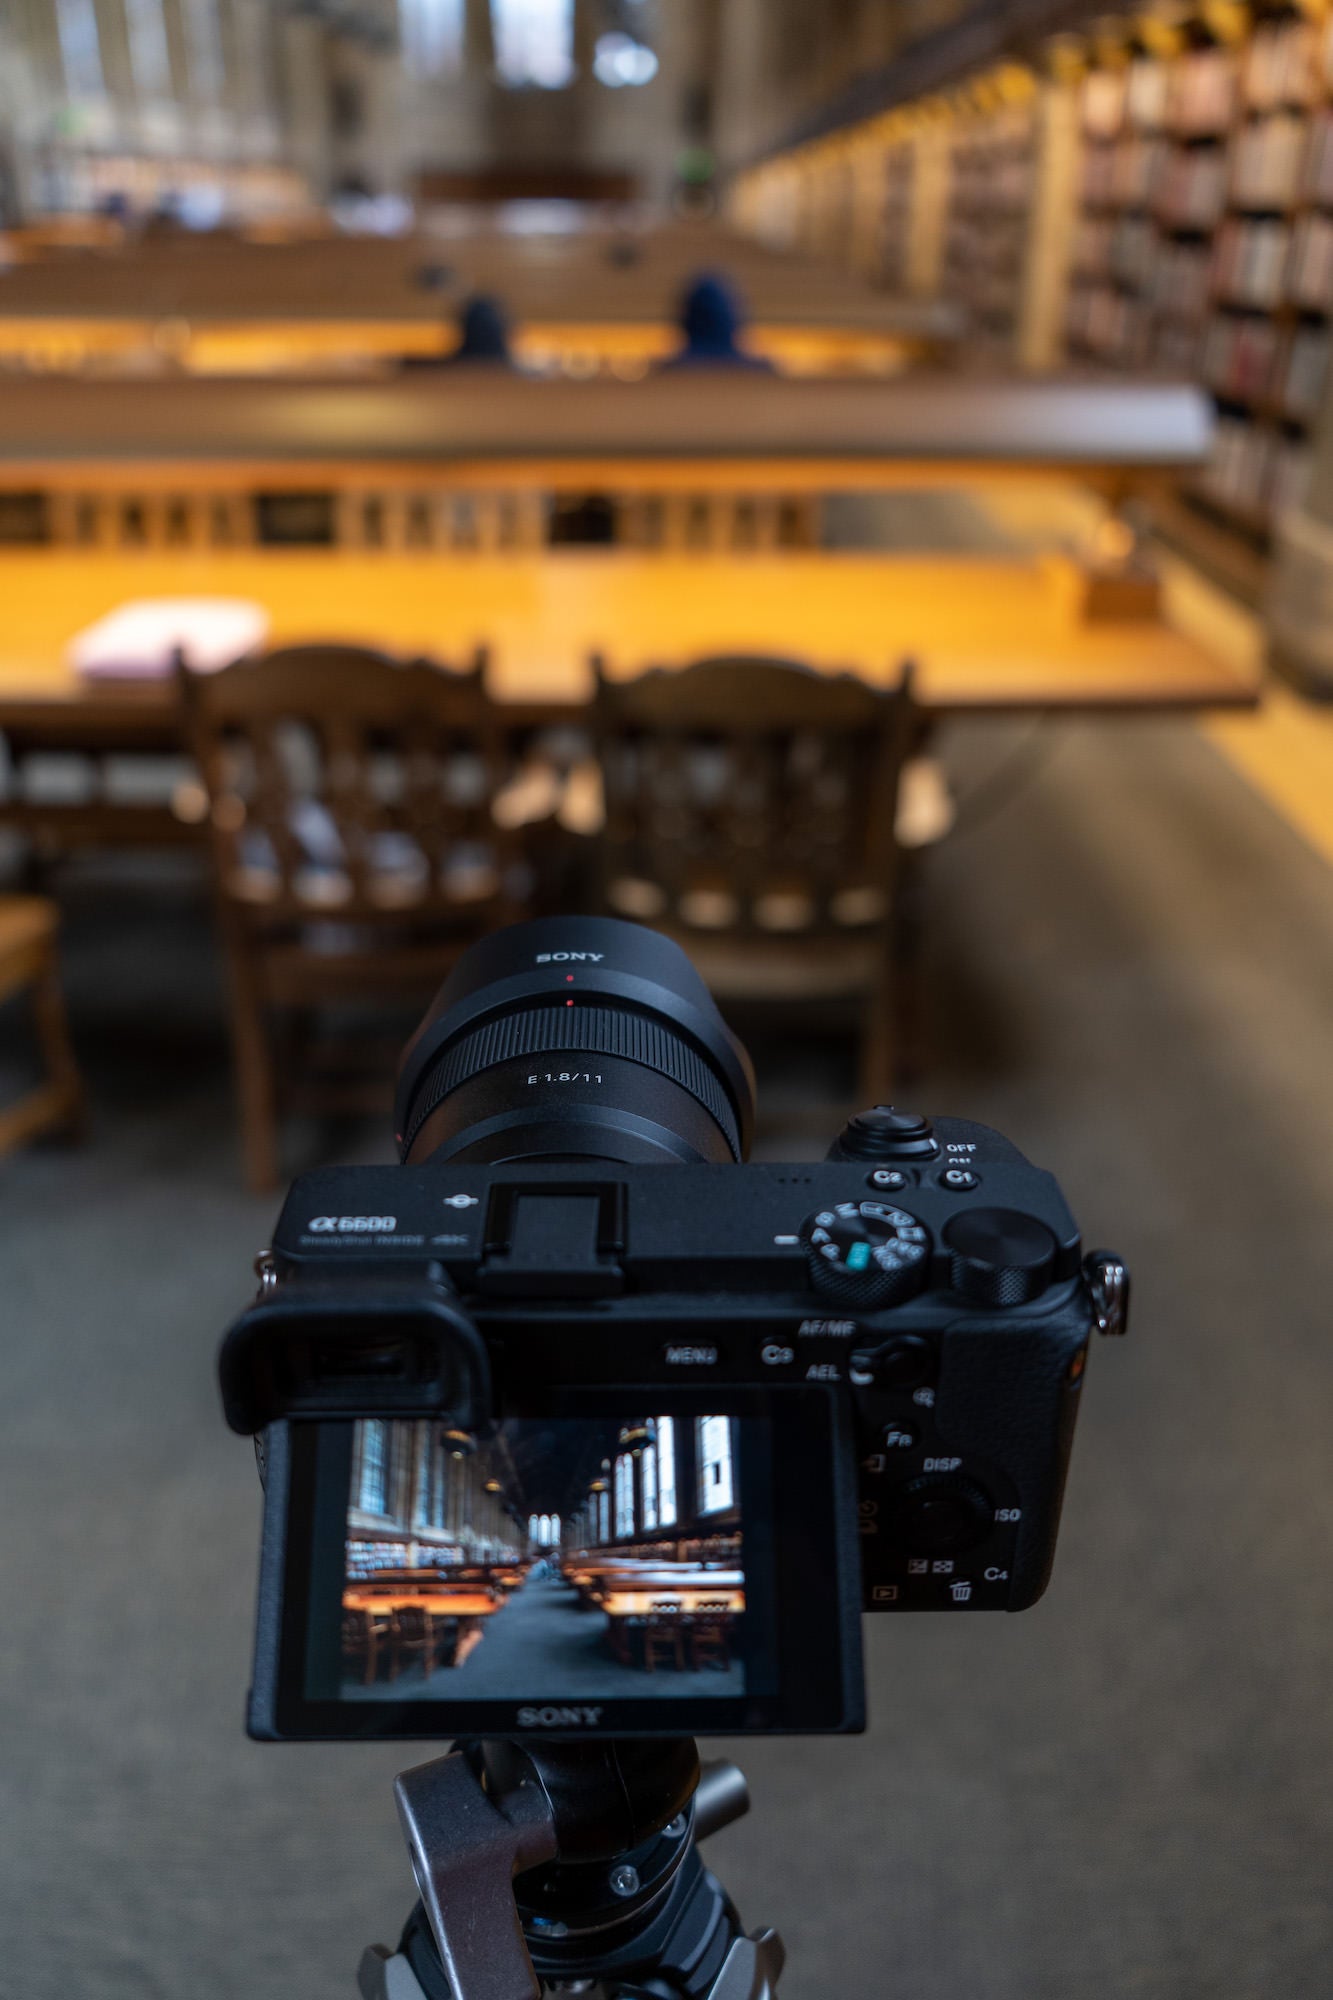 Hands On With The New Sony Ultra-Wide 11mm f/1.8 APS-C E-Mount